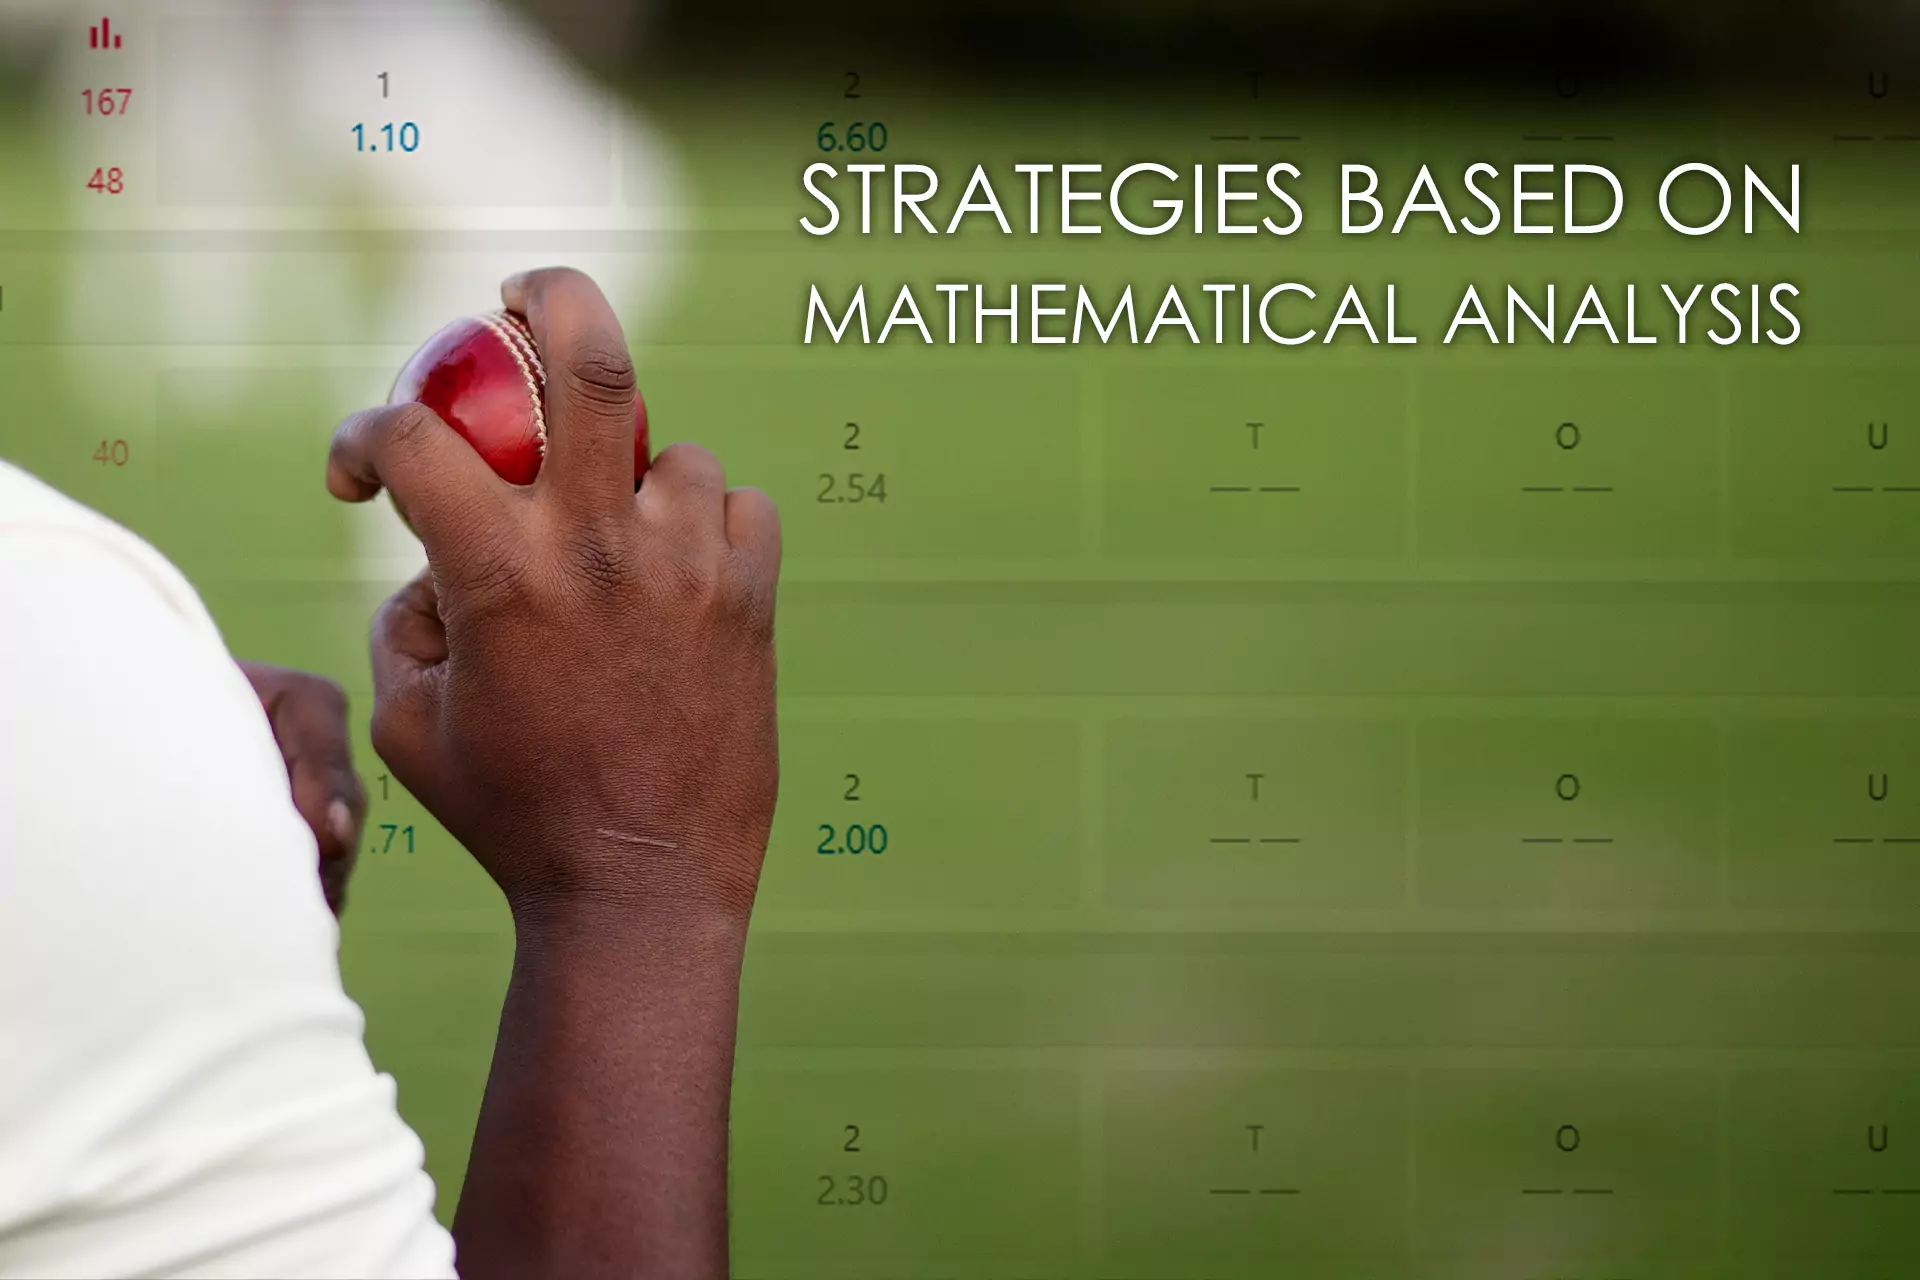 Mathematical analysis help cricket fans to predict outcomes.